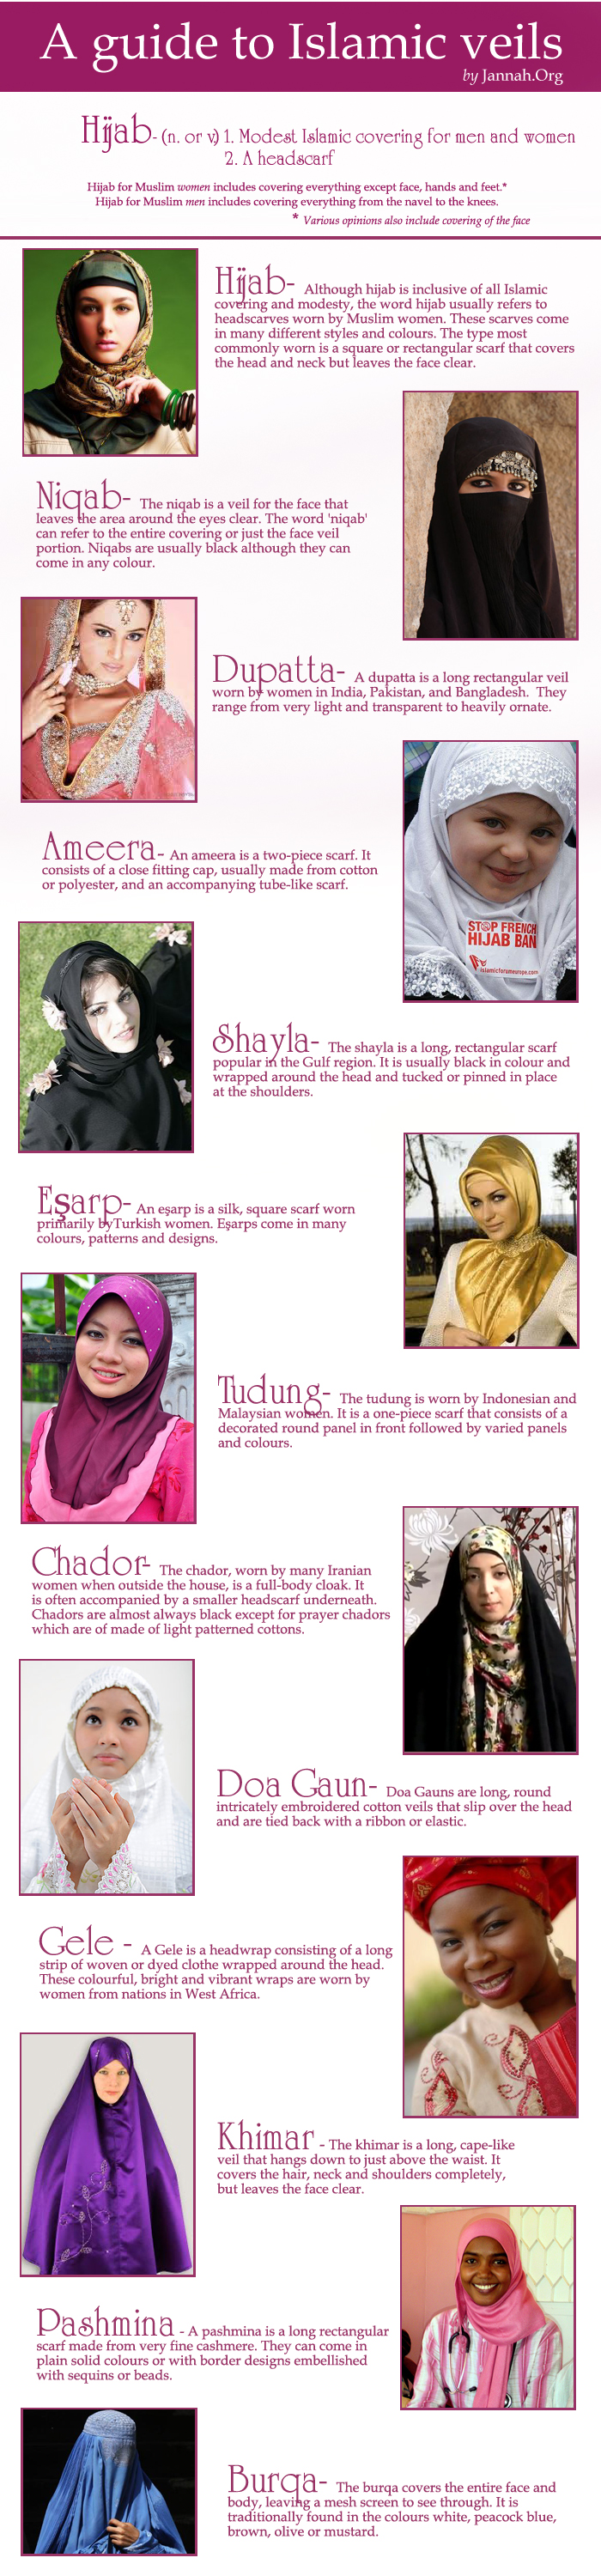 The Muslim clothing guide